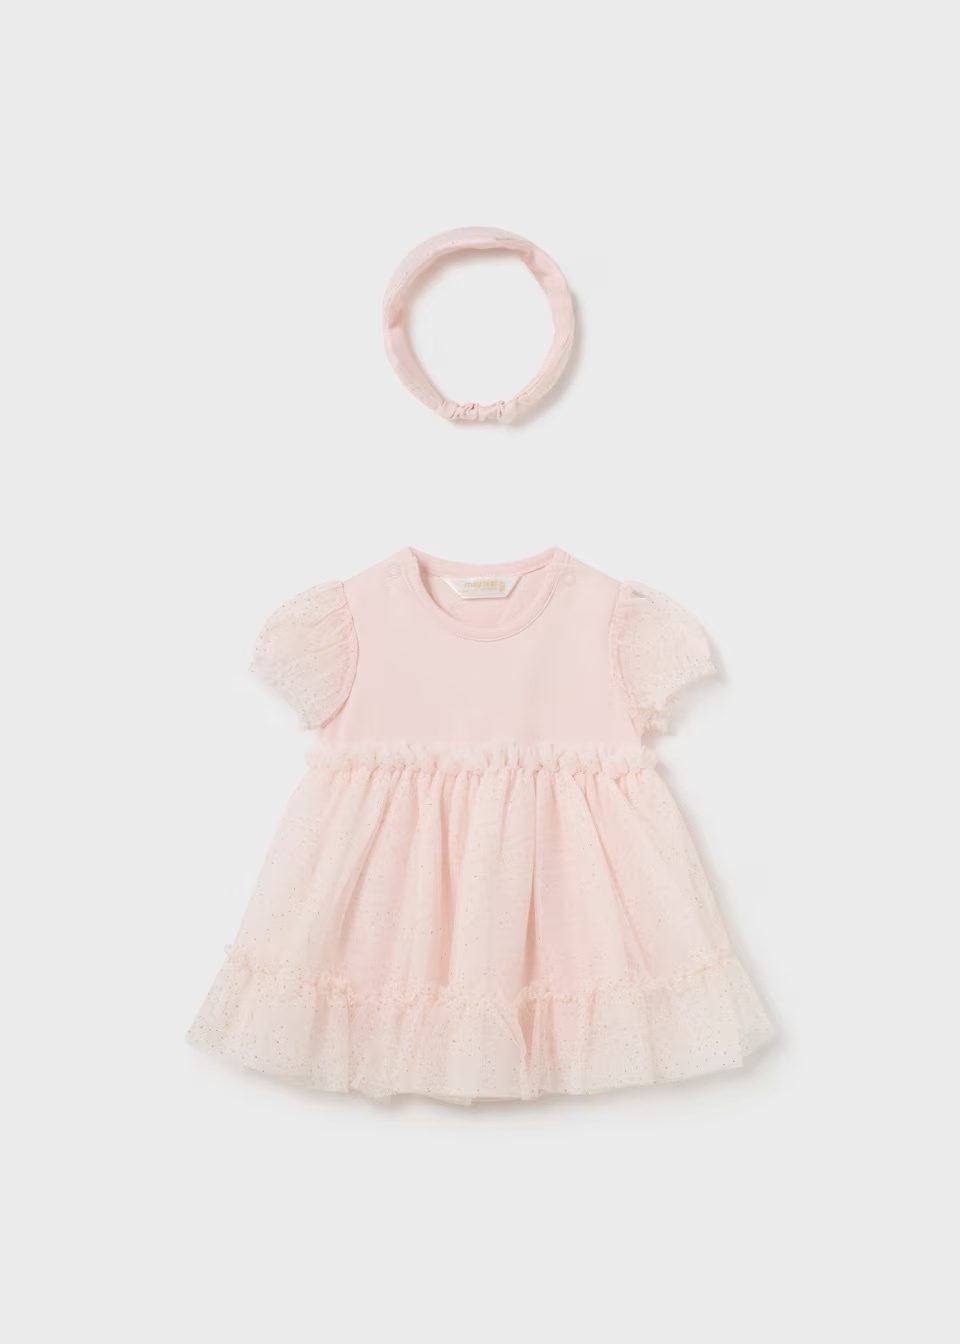 Mayoral Mayoral Newborn Romper w/ Tulle Skirt and Crown